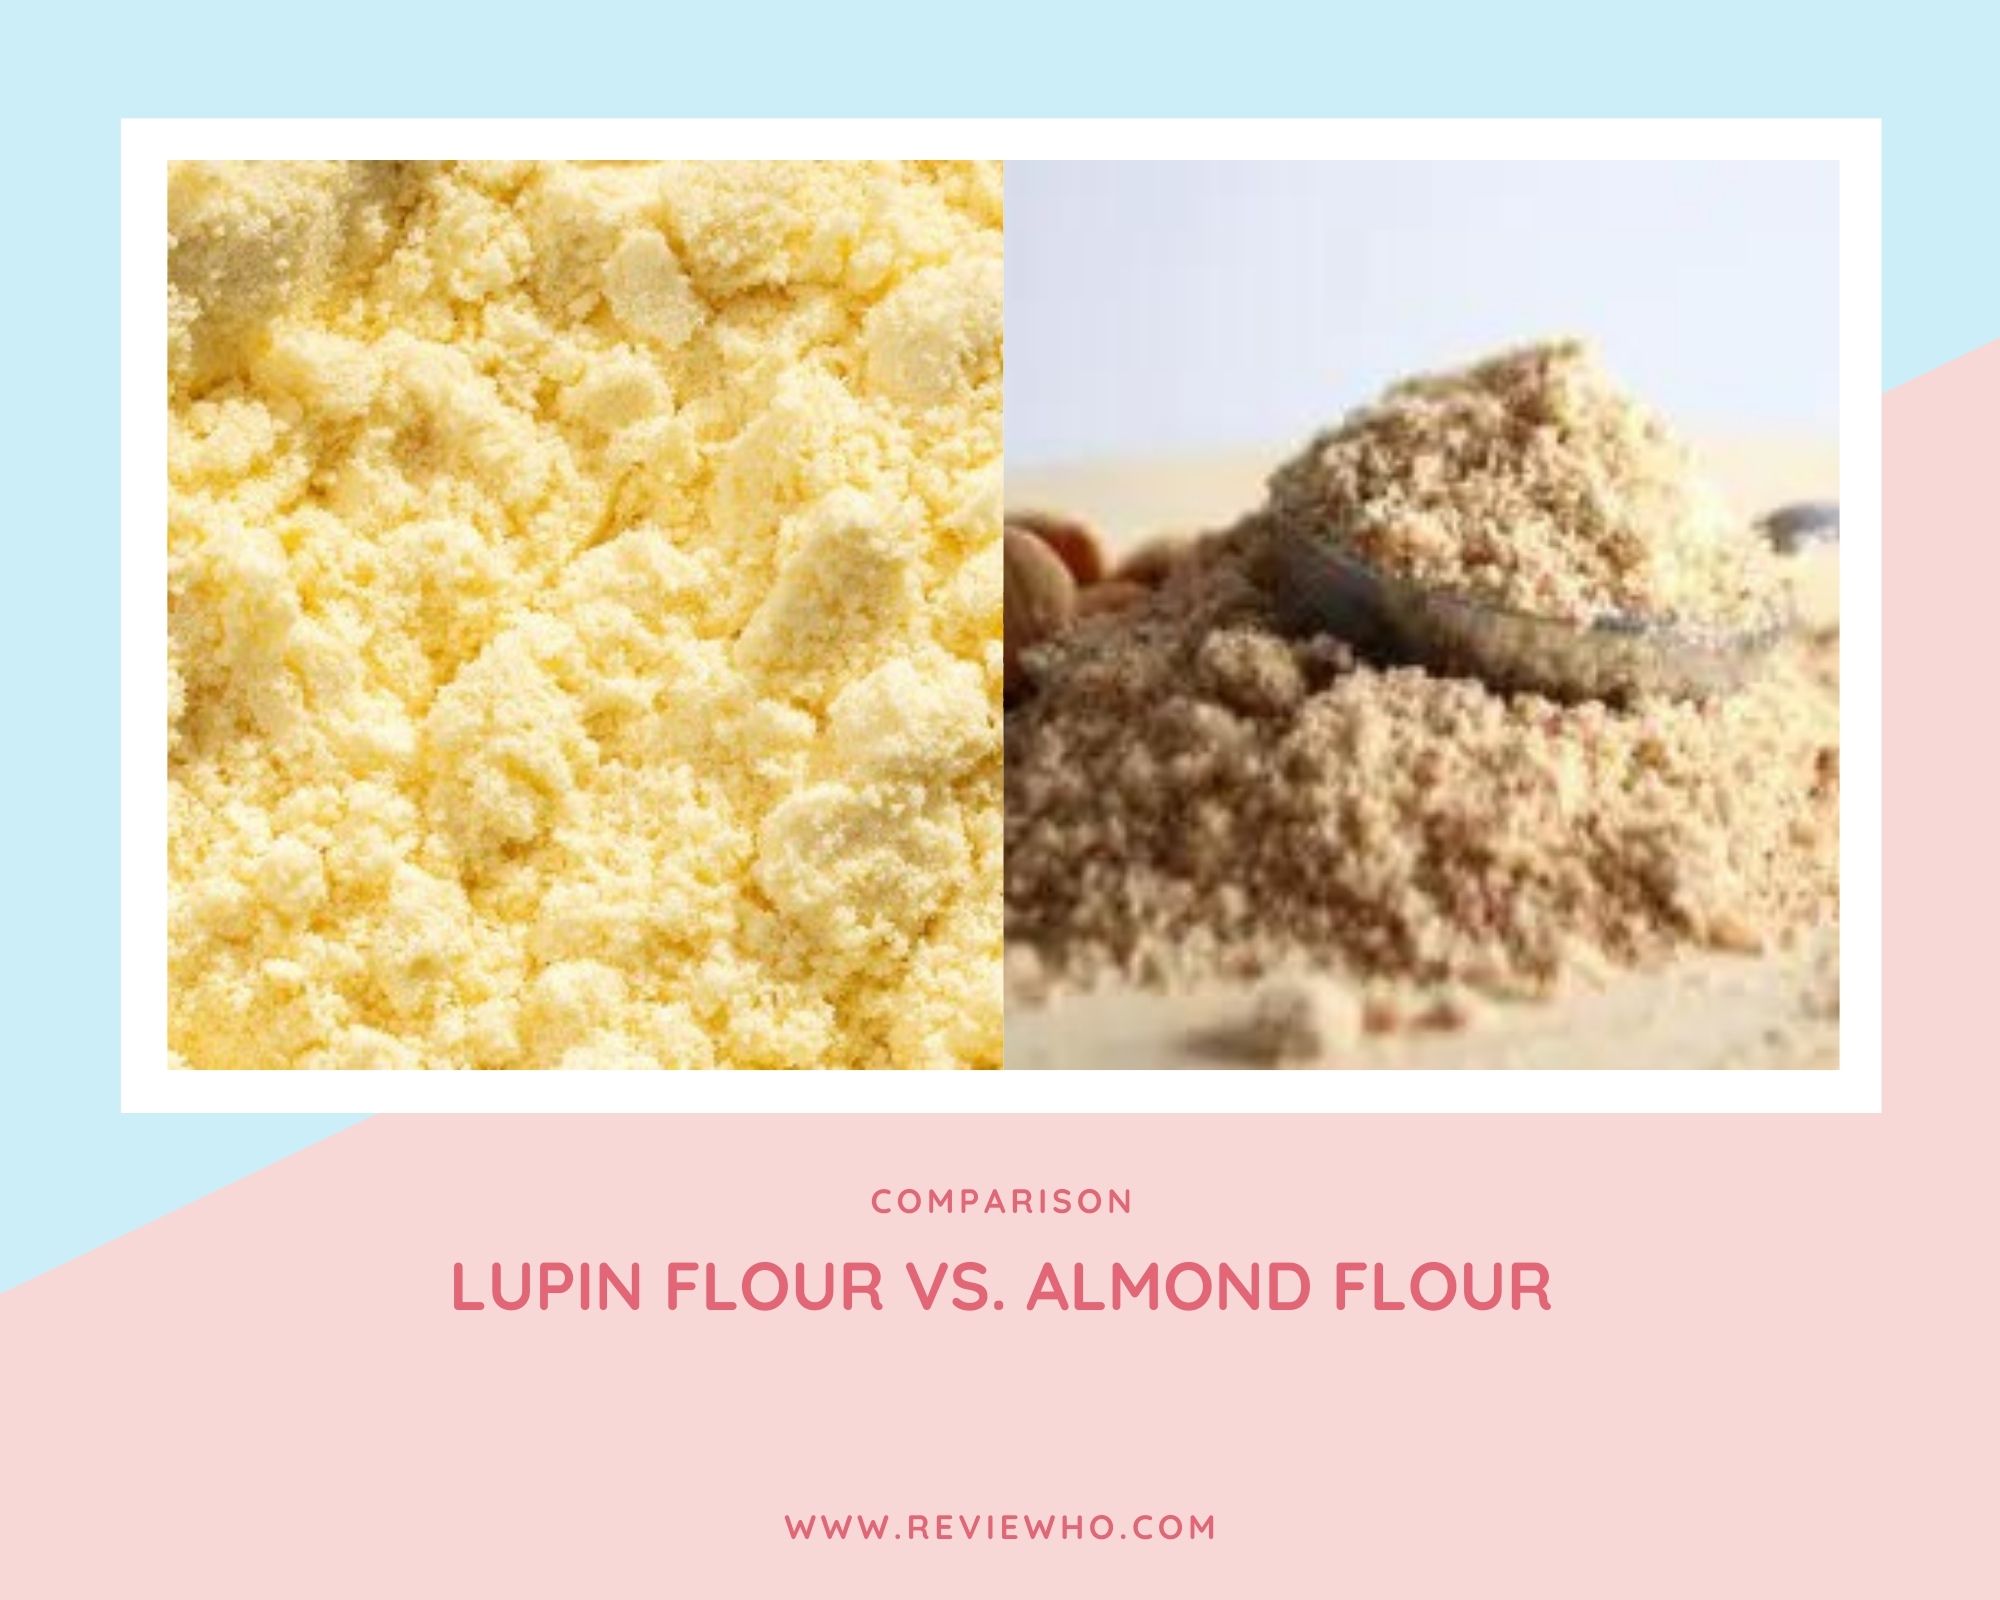 Difference Between Lupin Flour and Almond Flour